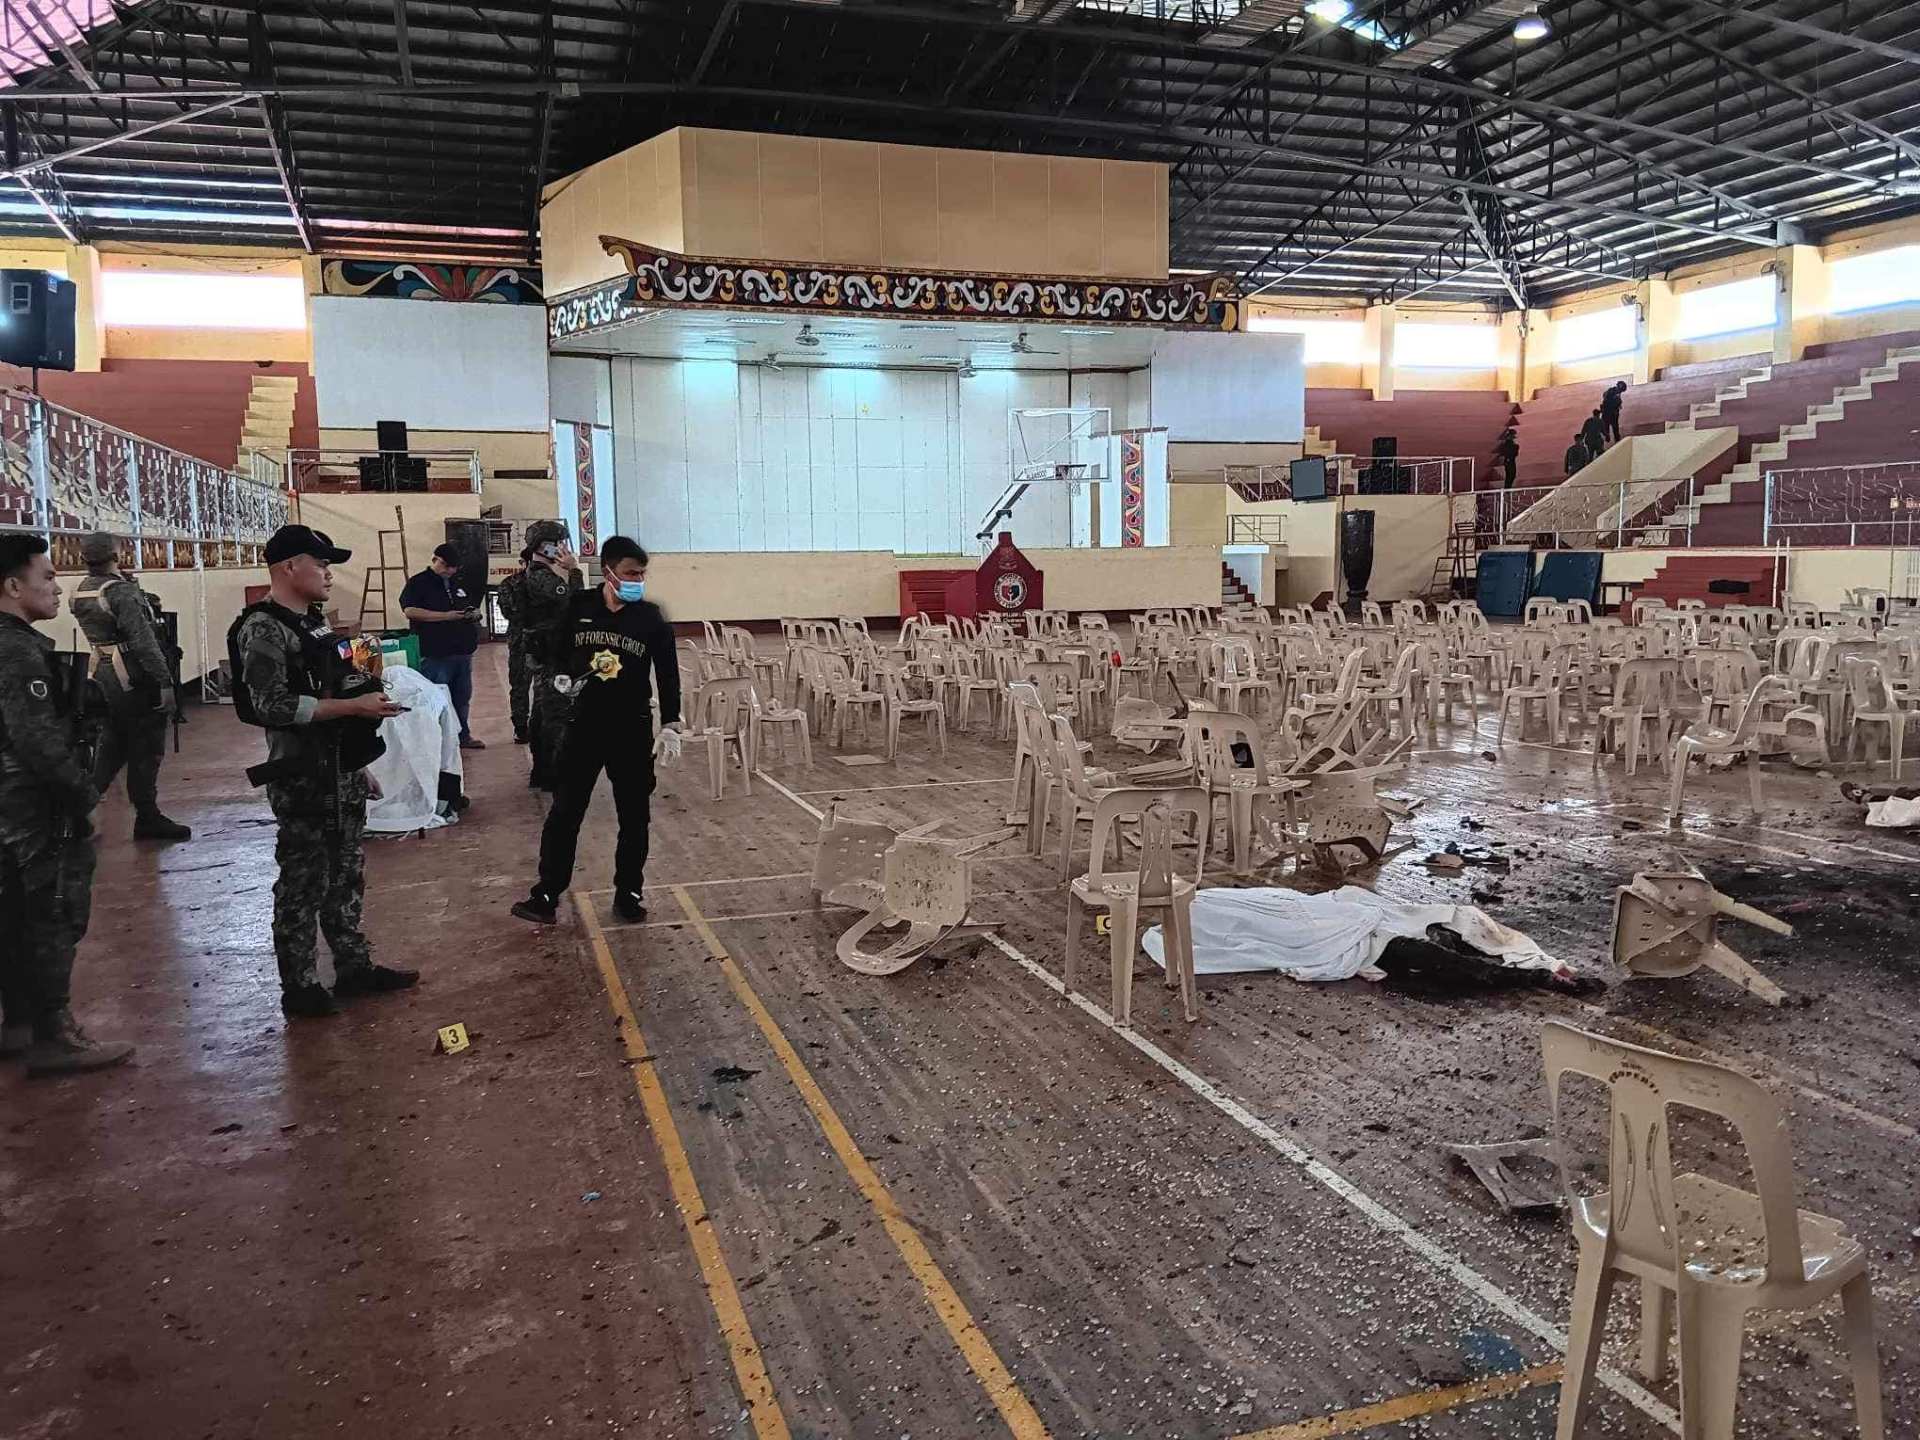 ISIL claims bombing at Catholic mass in Philippines | Crime News #ISIL #claims #bombing #Catholic #mass #Philippines #Crime #News